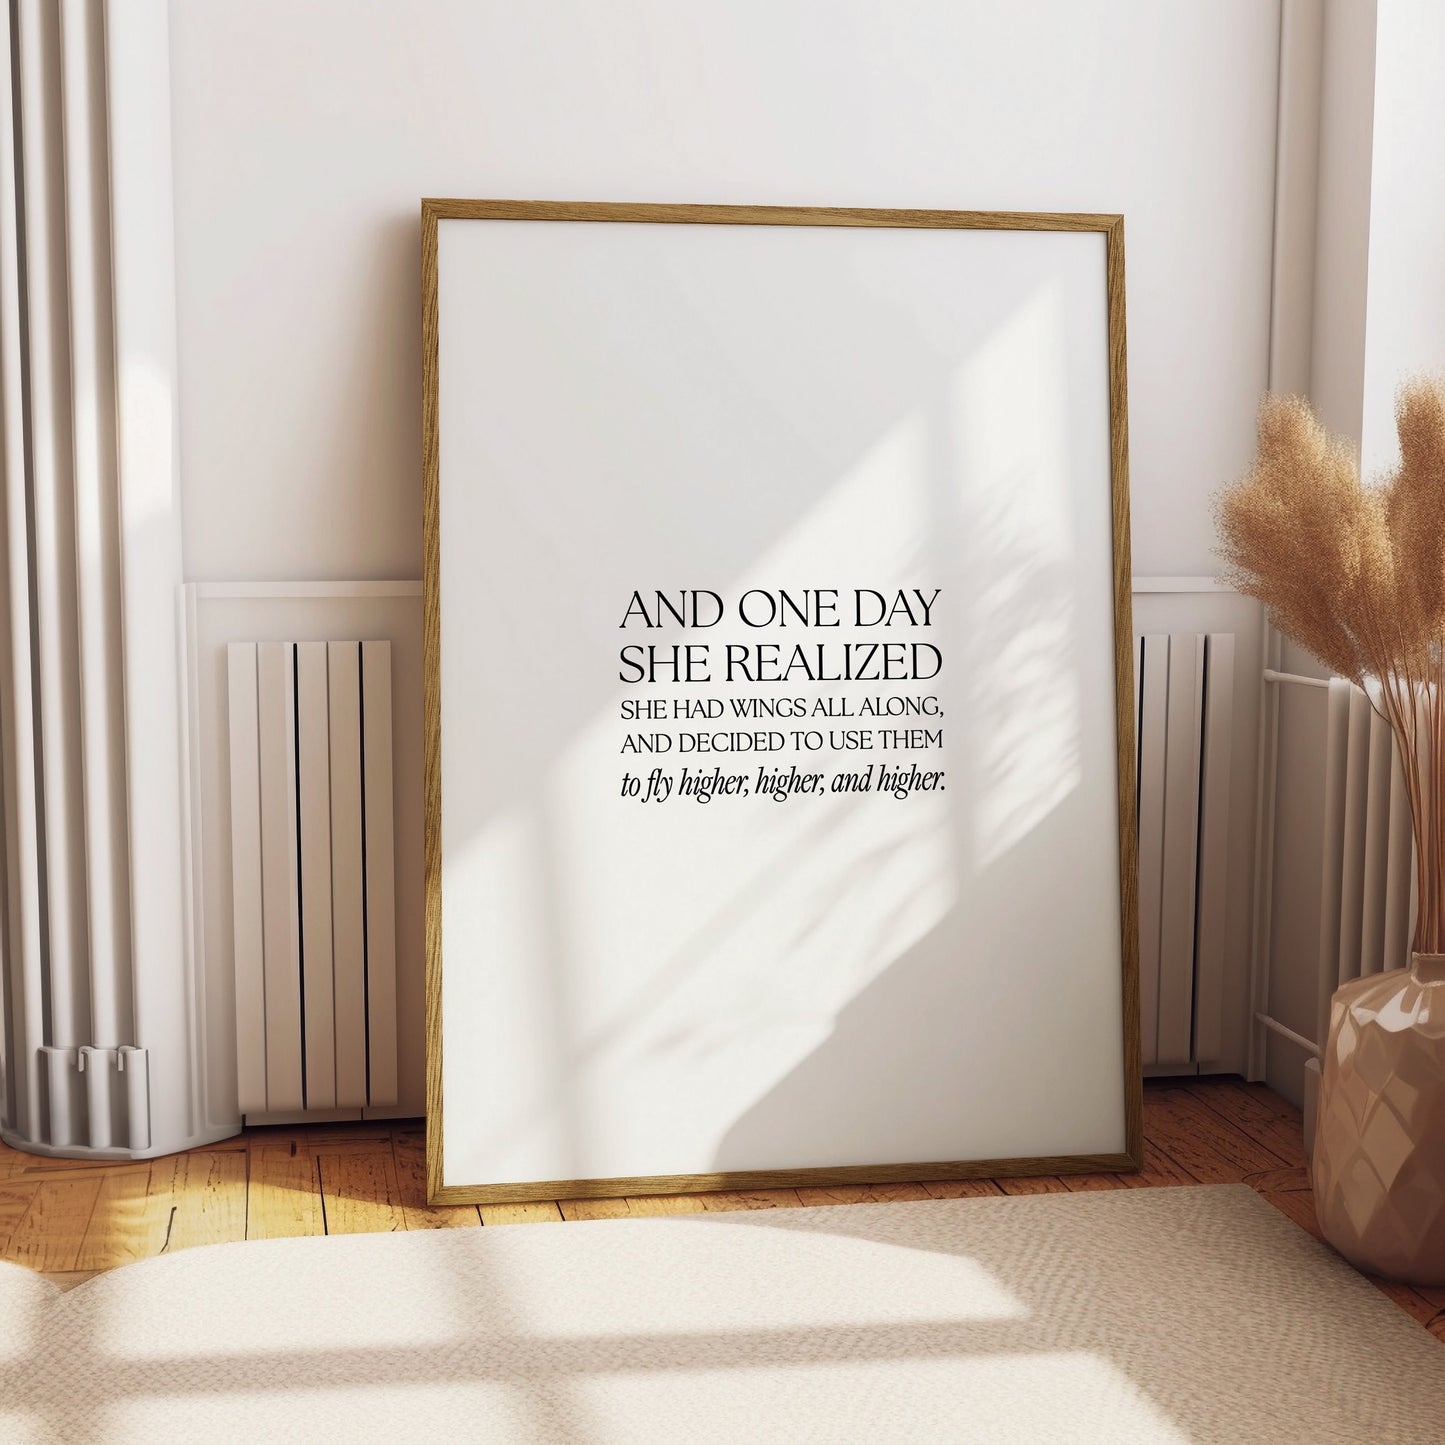 And one day she realized,She had wings all along,Inspirational wall art,Motivational quote print,Positive quote,Wall art,Female empowerment